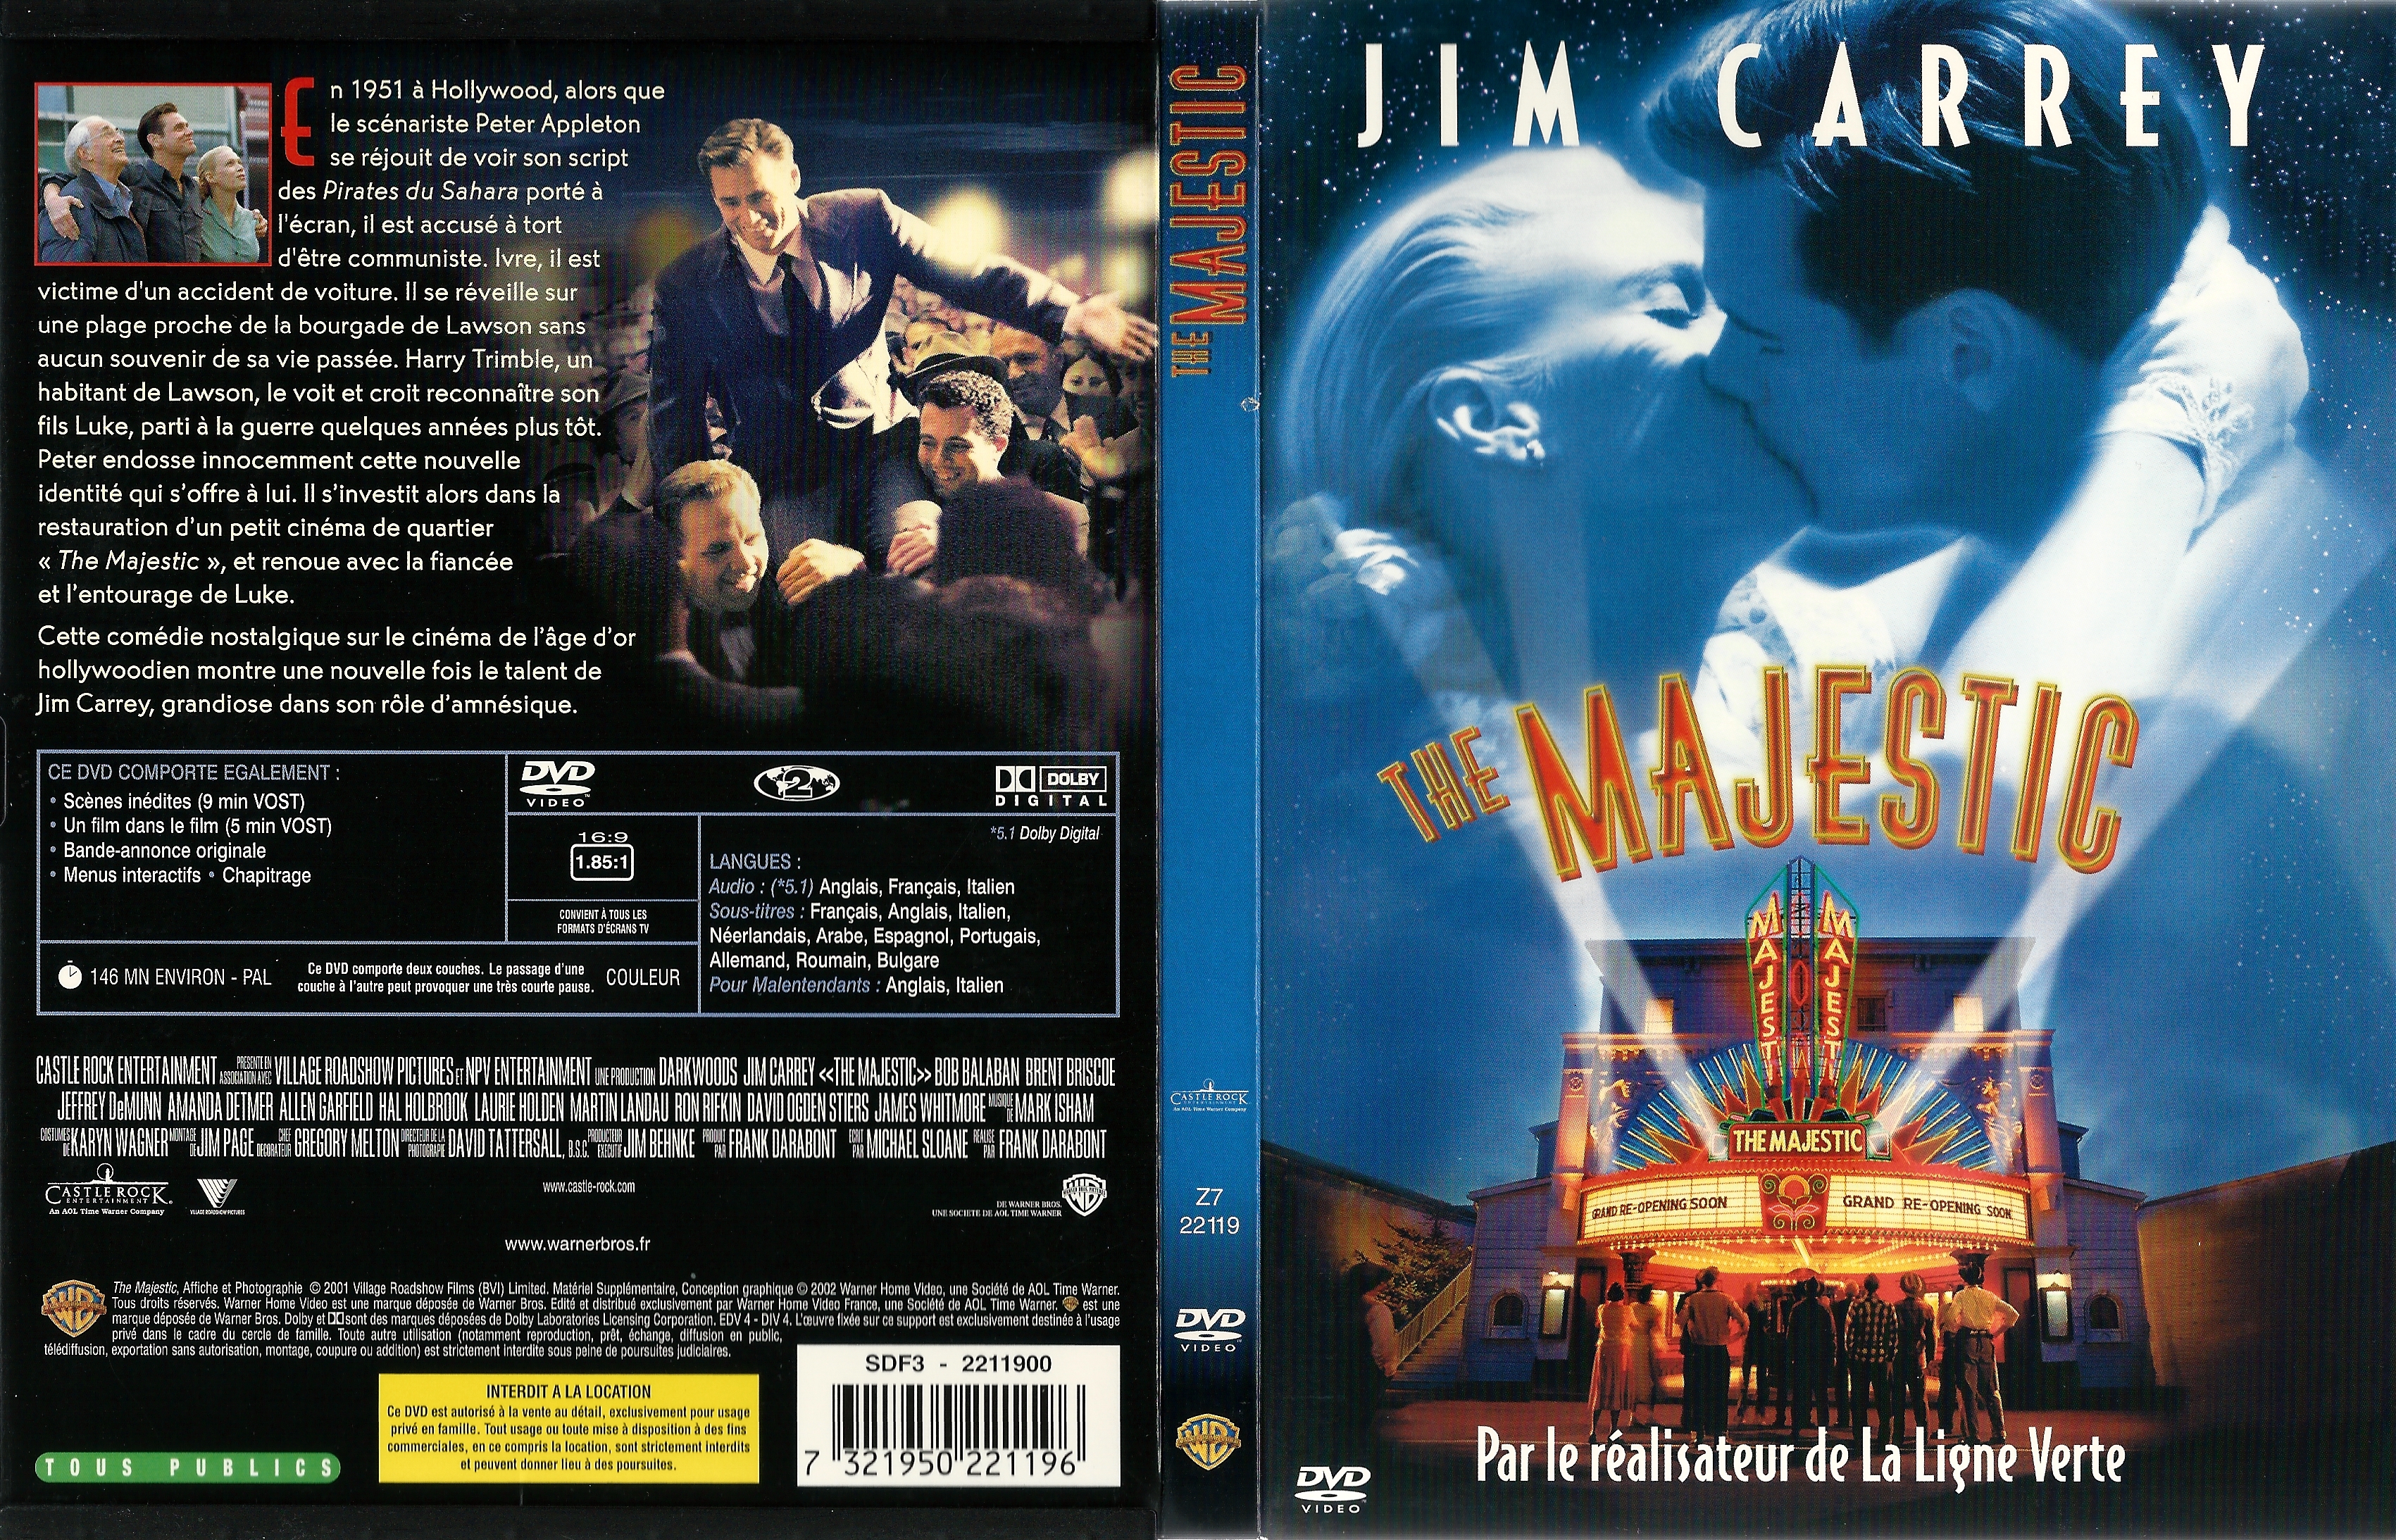 Jaquette DVD The majestic v2